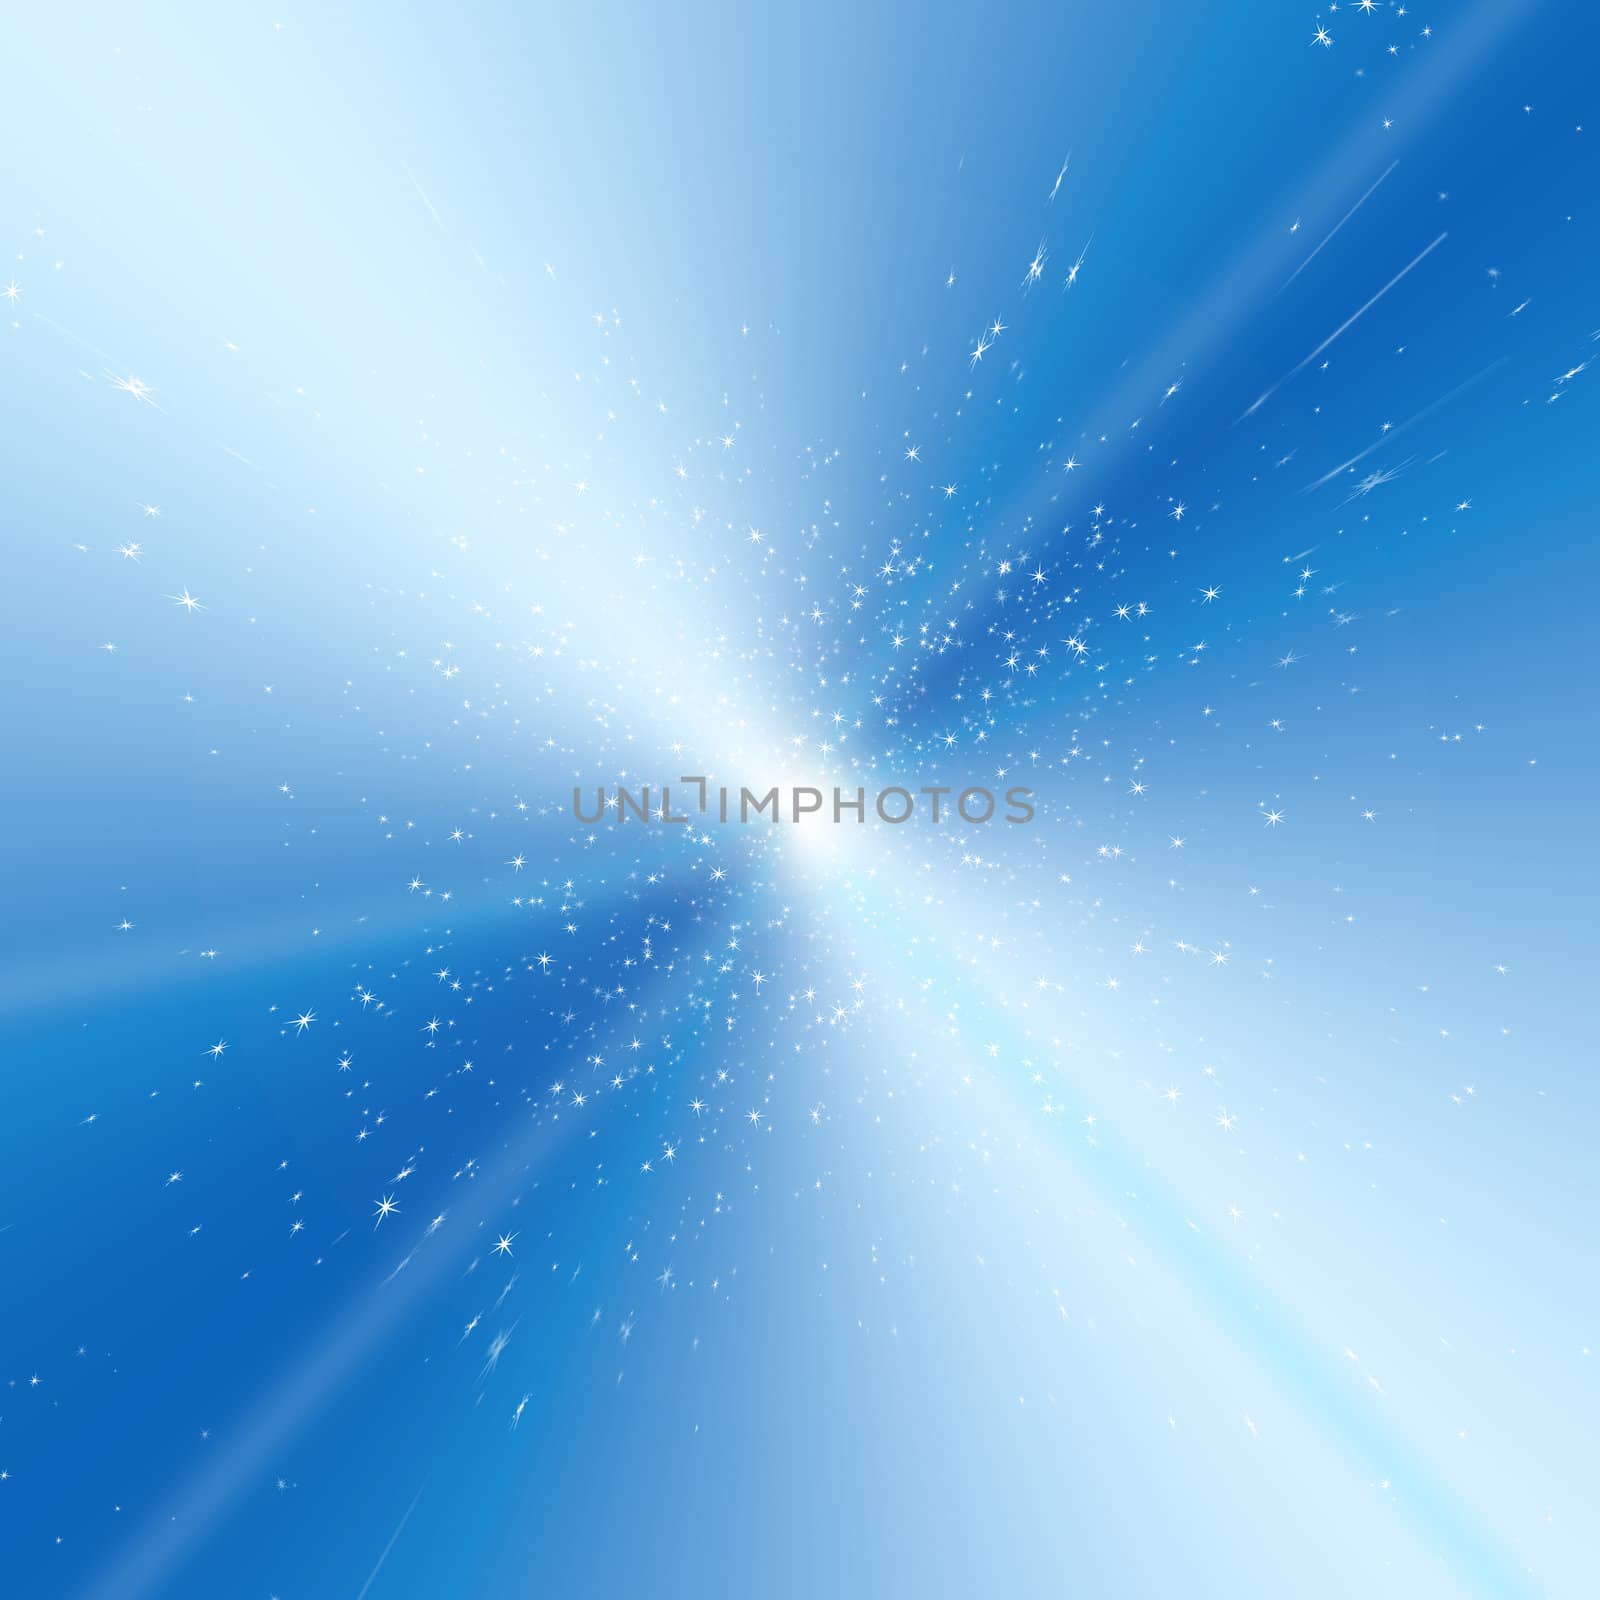 Blue abstract illustration depicting many stars giving the effect of high speed towards a central light source.